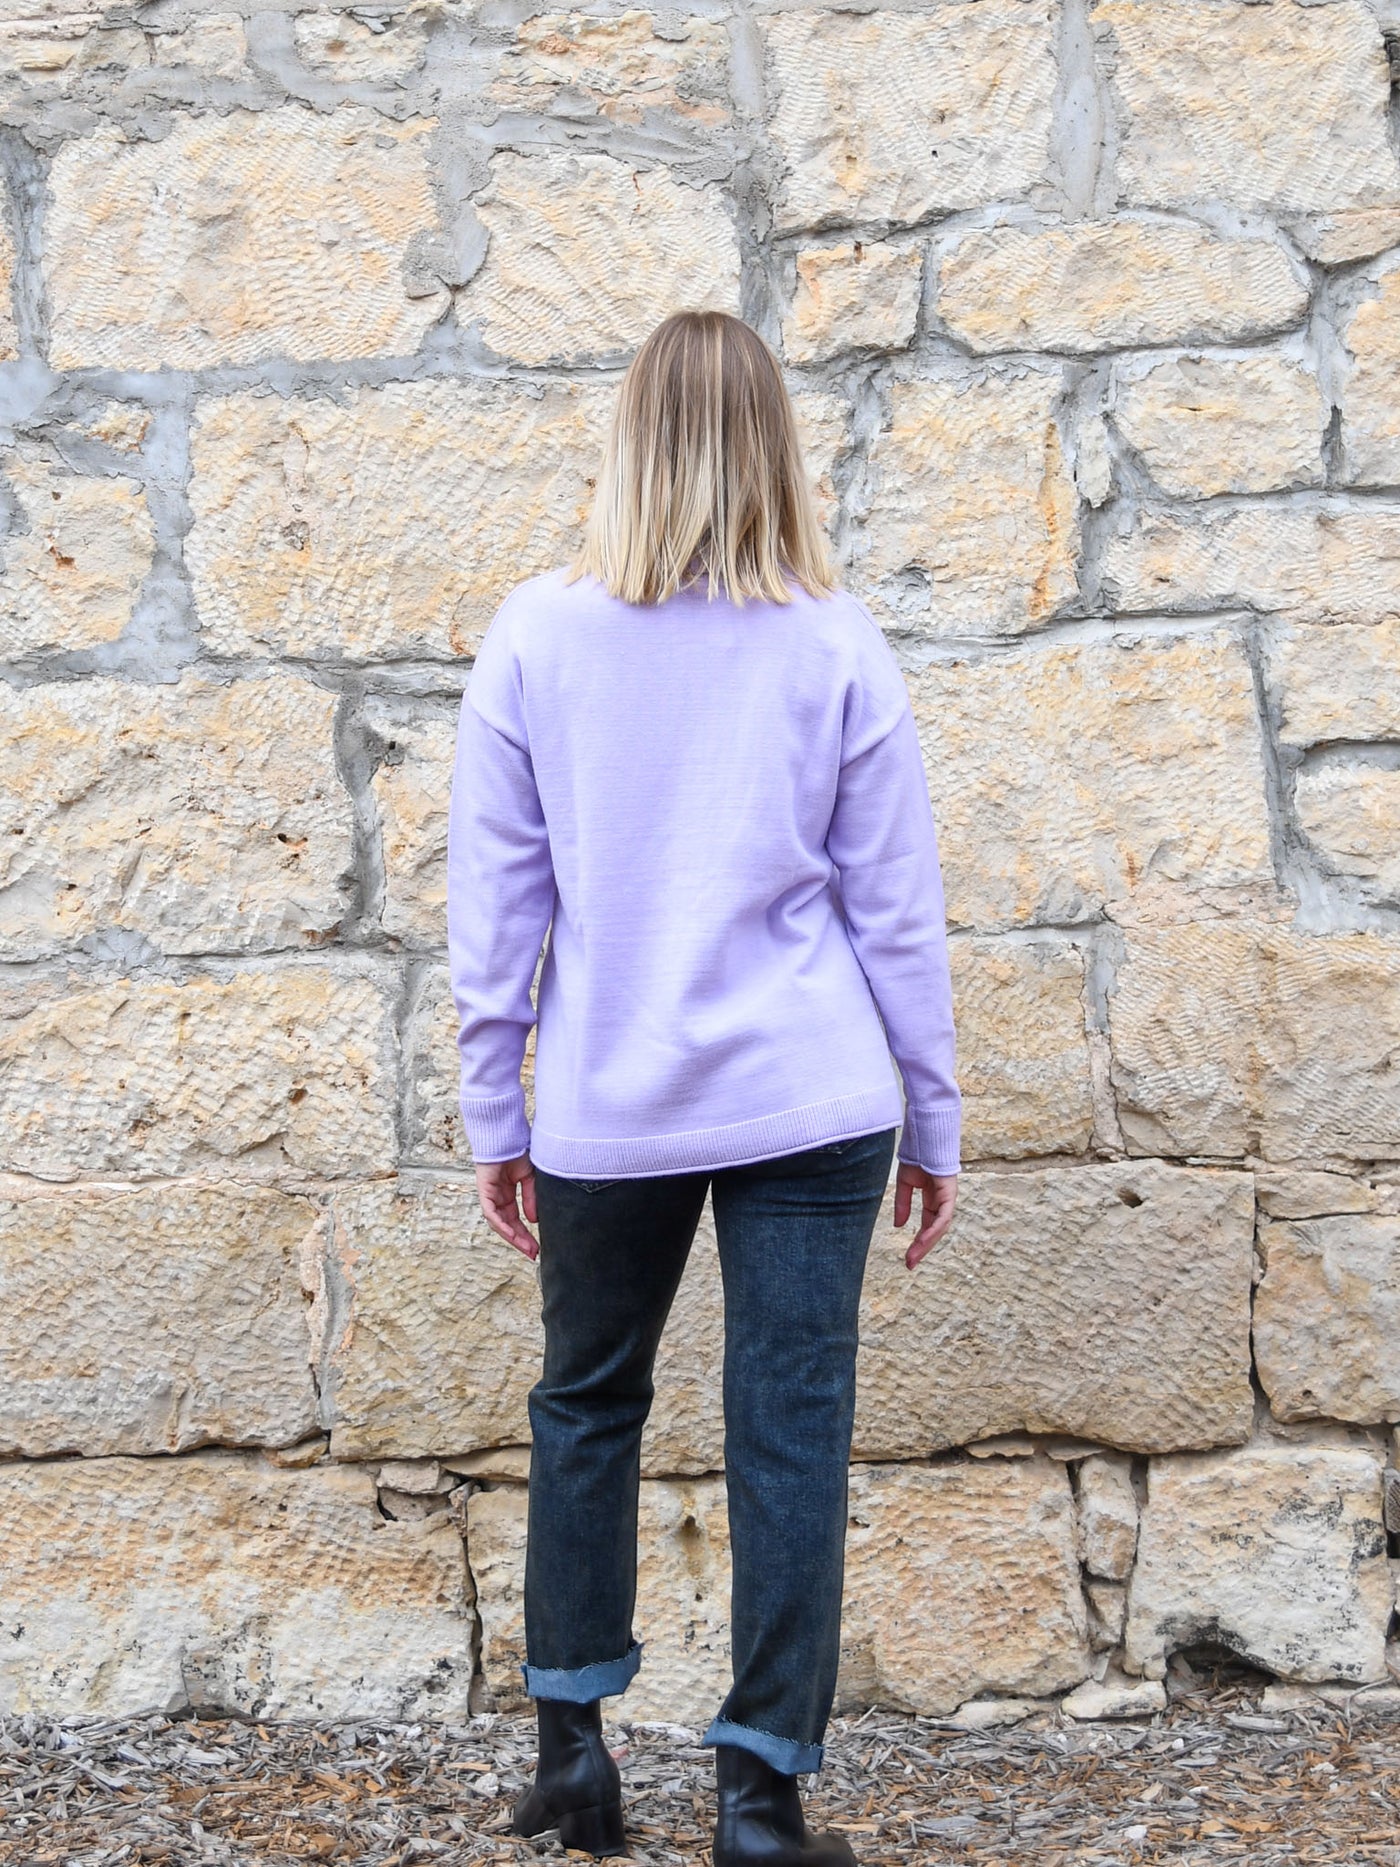 A model wearing a lavender colored turtleneck sweater. The model has it paired with a gray acid wash jean and black booties.